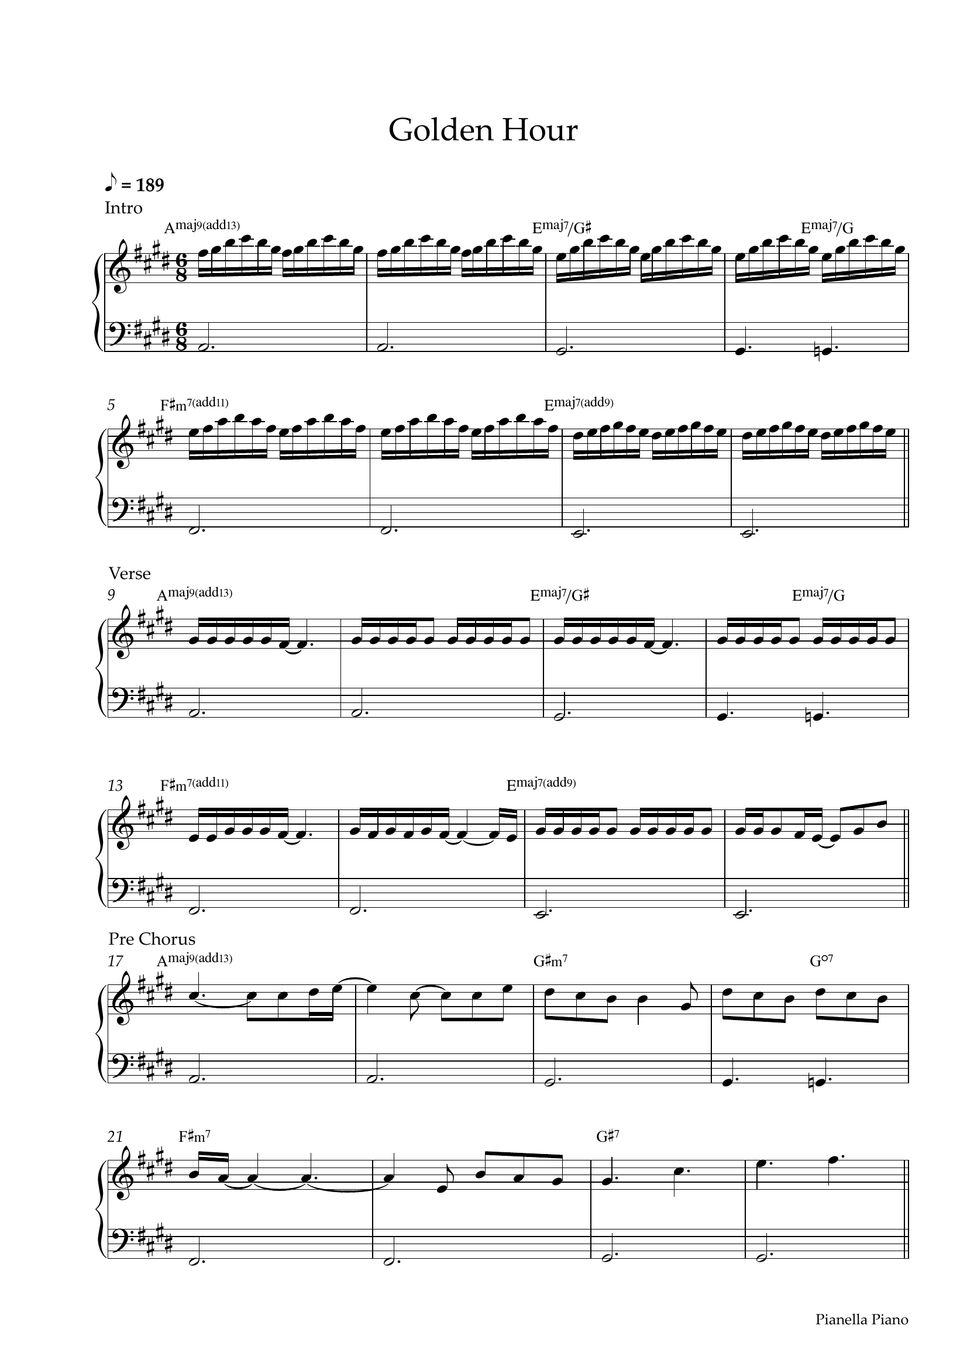 JVKE - golden hour (EASY PIANO SHEET) Partition musicale by Pianella Piano